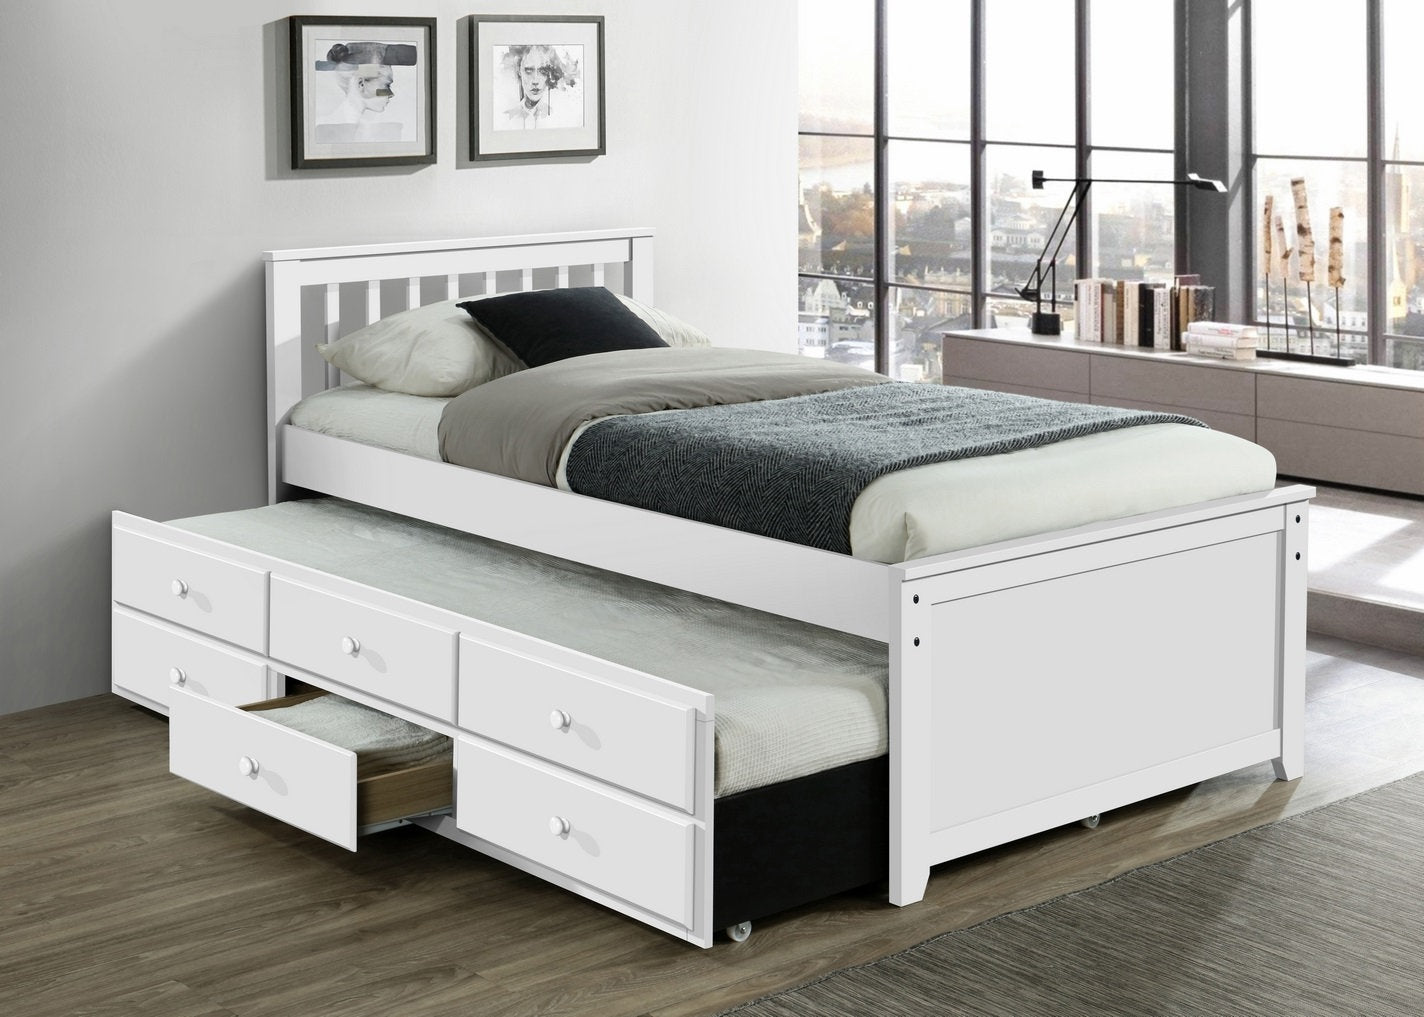 Modern Wood Captain's Bed with Low-rise Headboard